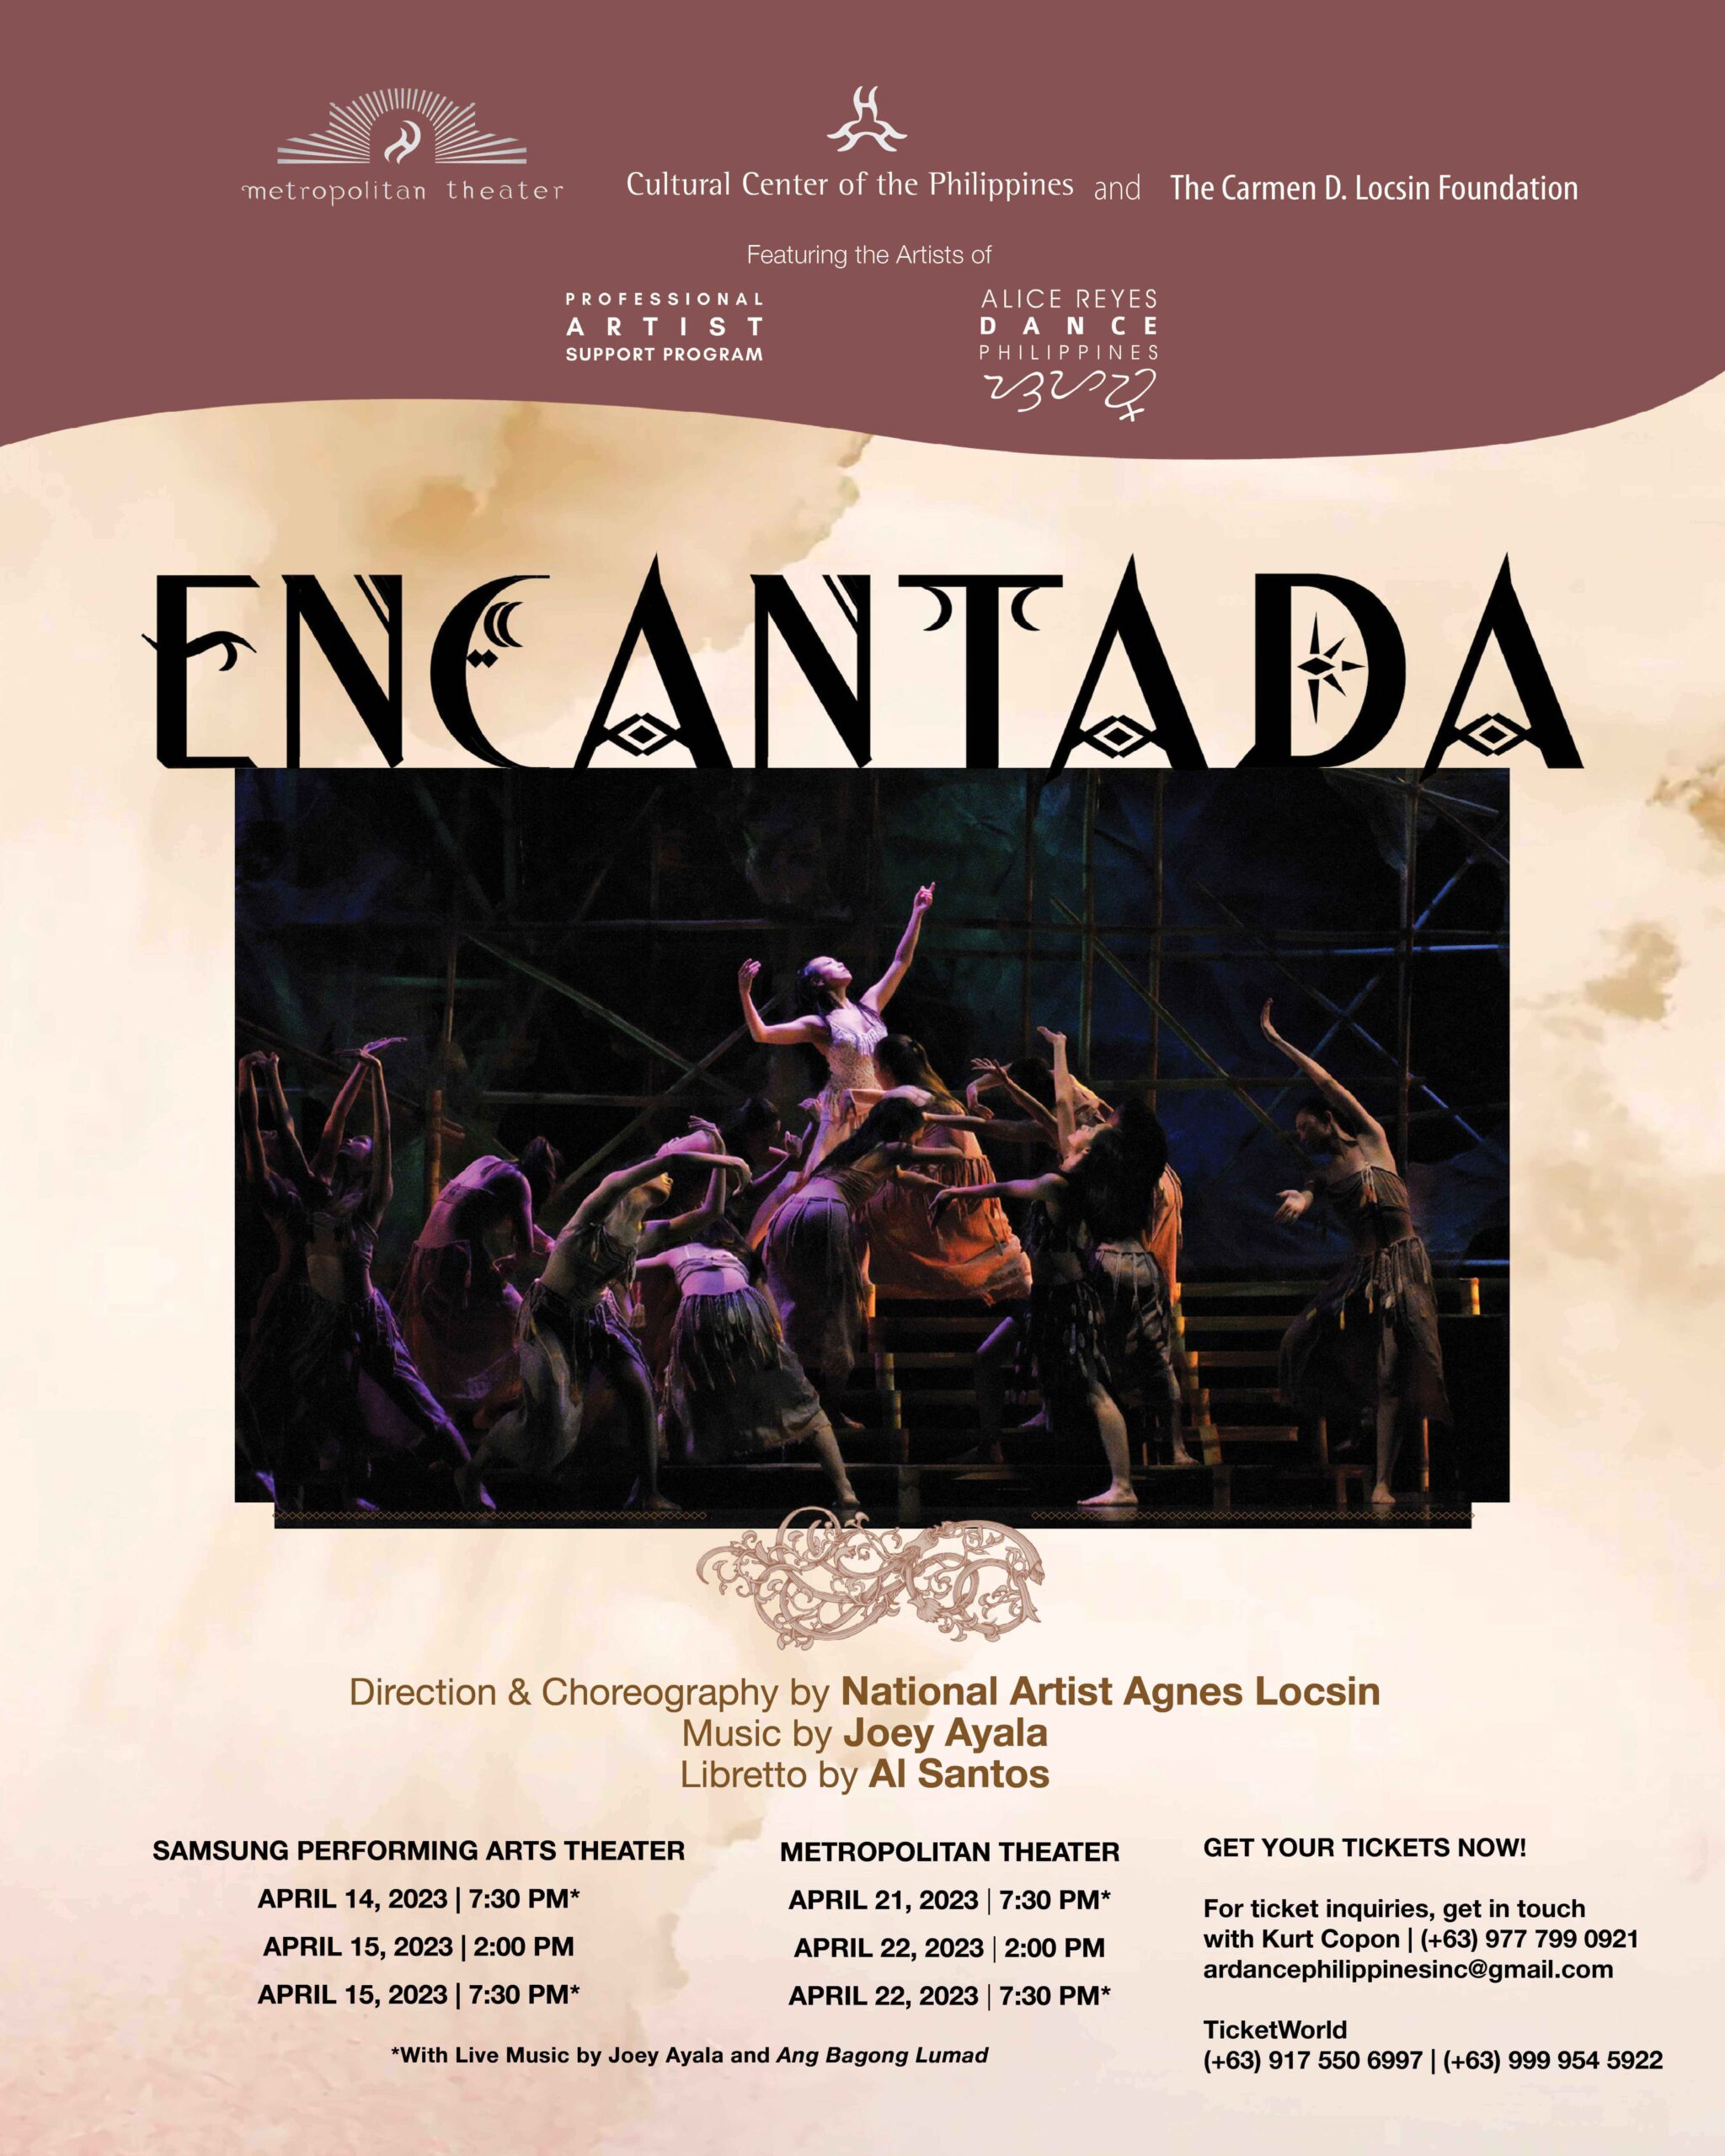 The official poster of Encantada's 2023 production